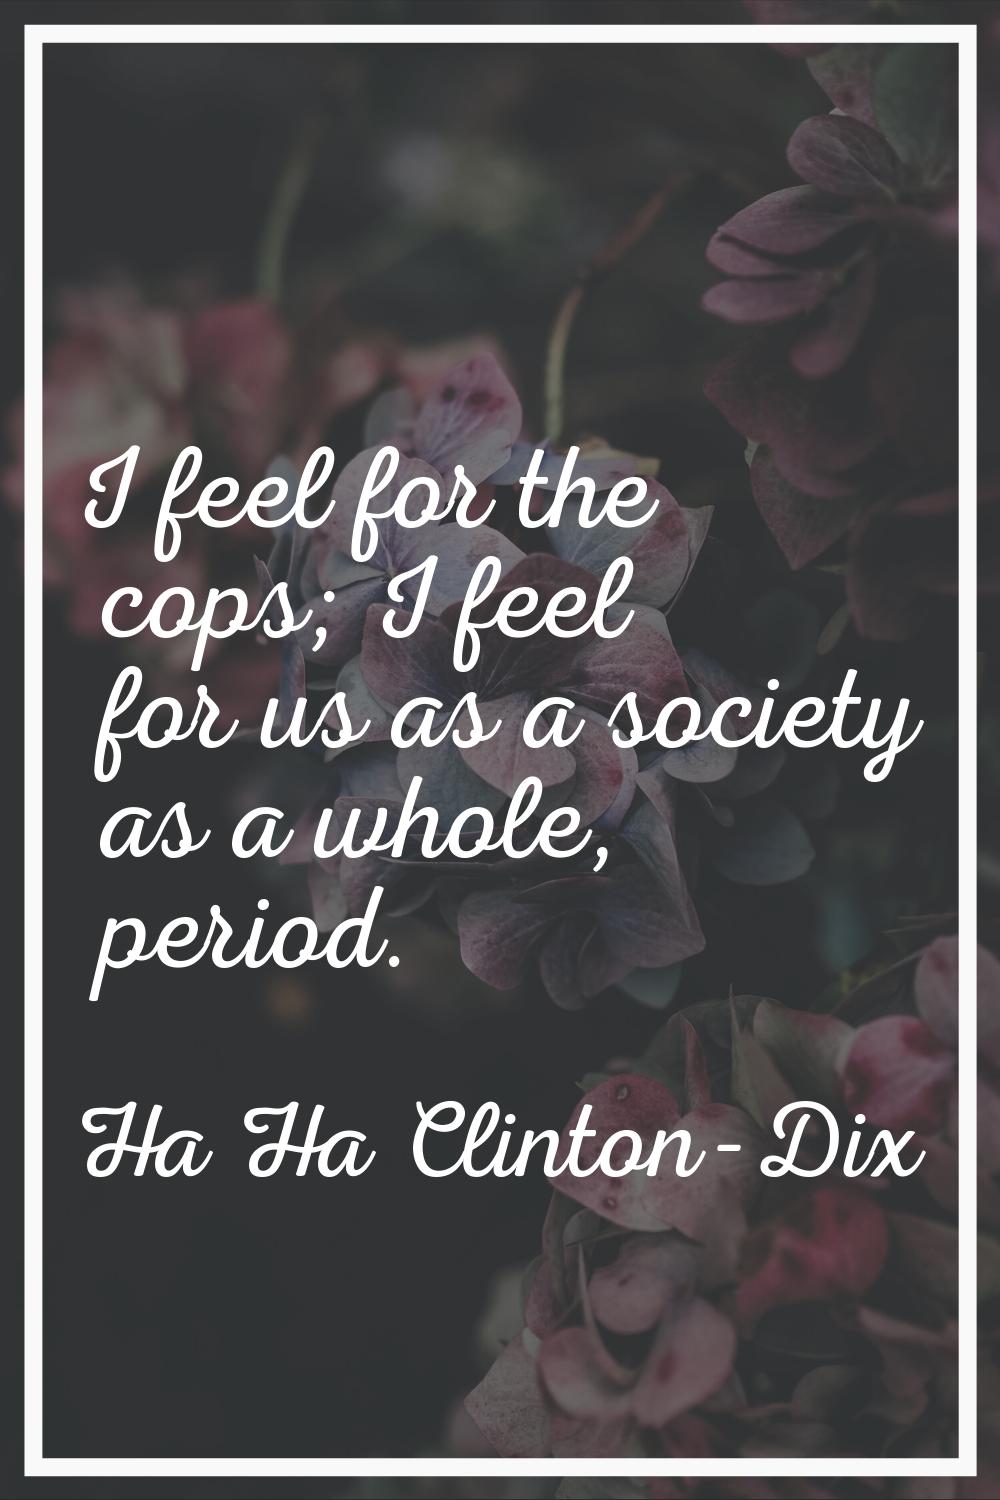 I feel for the cops; I feel for us as a society as a whole, period.